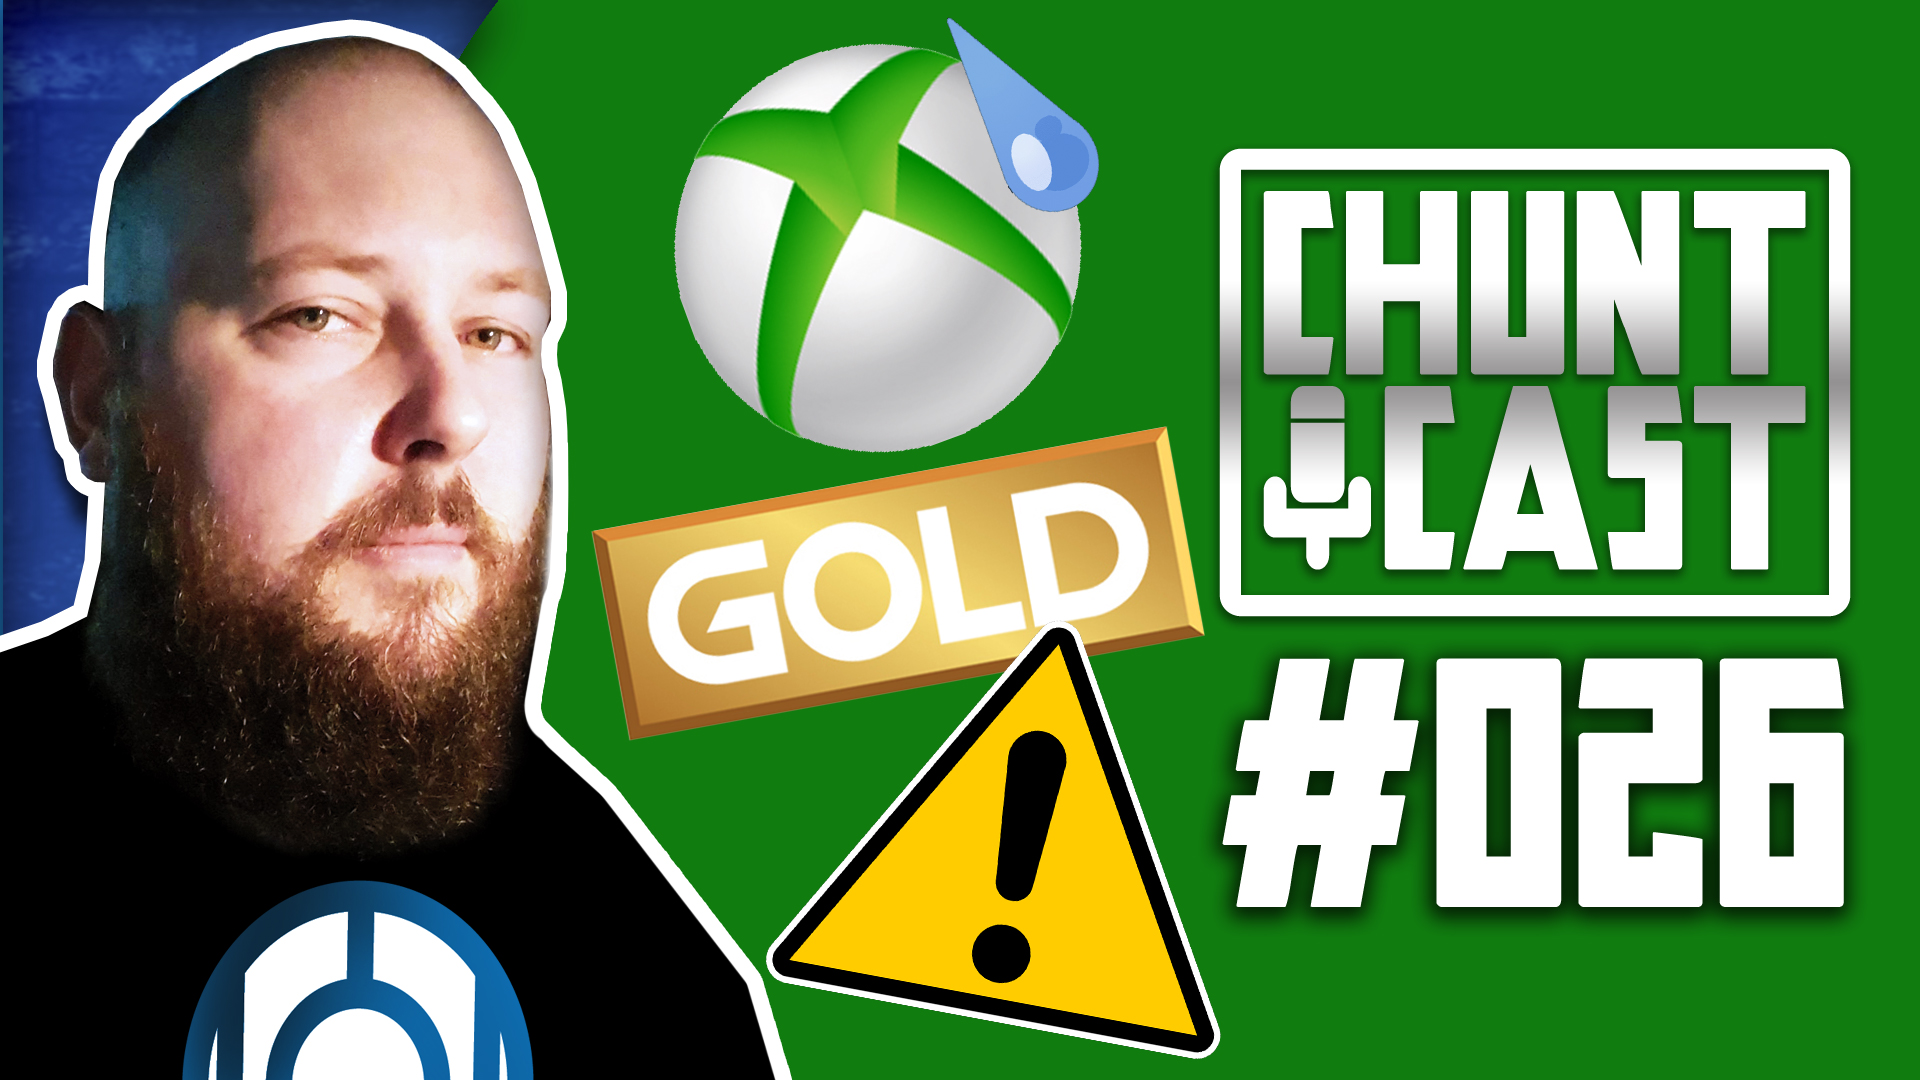 CHUNTCAST #26 – Xbox Live Gold price increase reversed. Free to Play now unlocked!